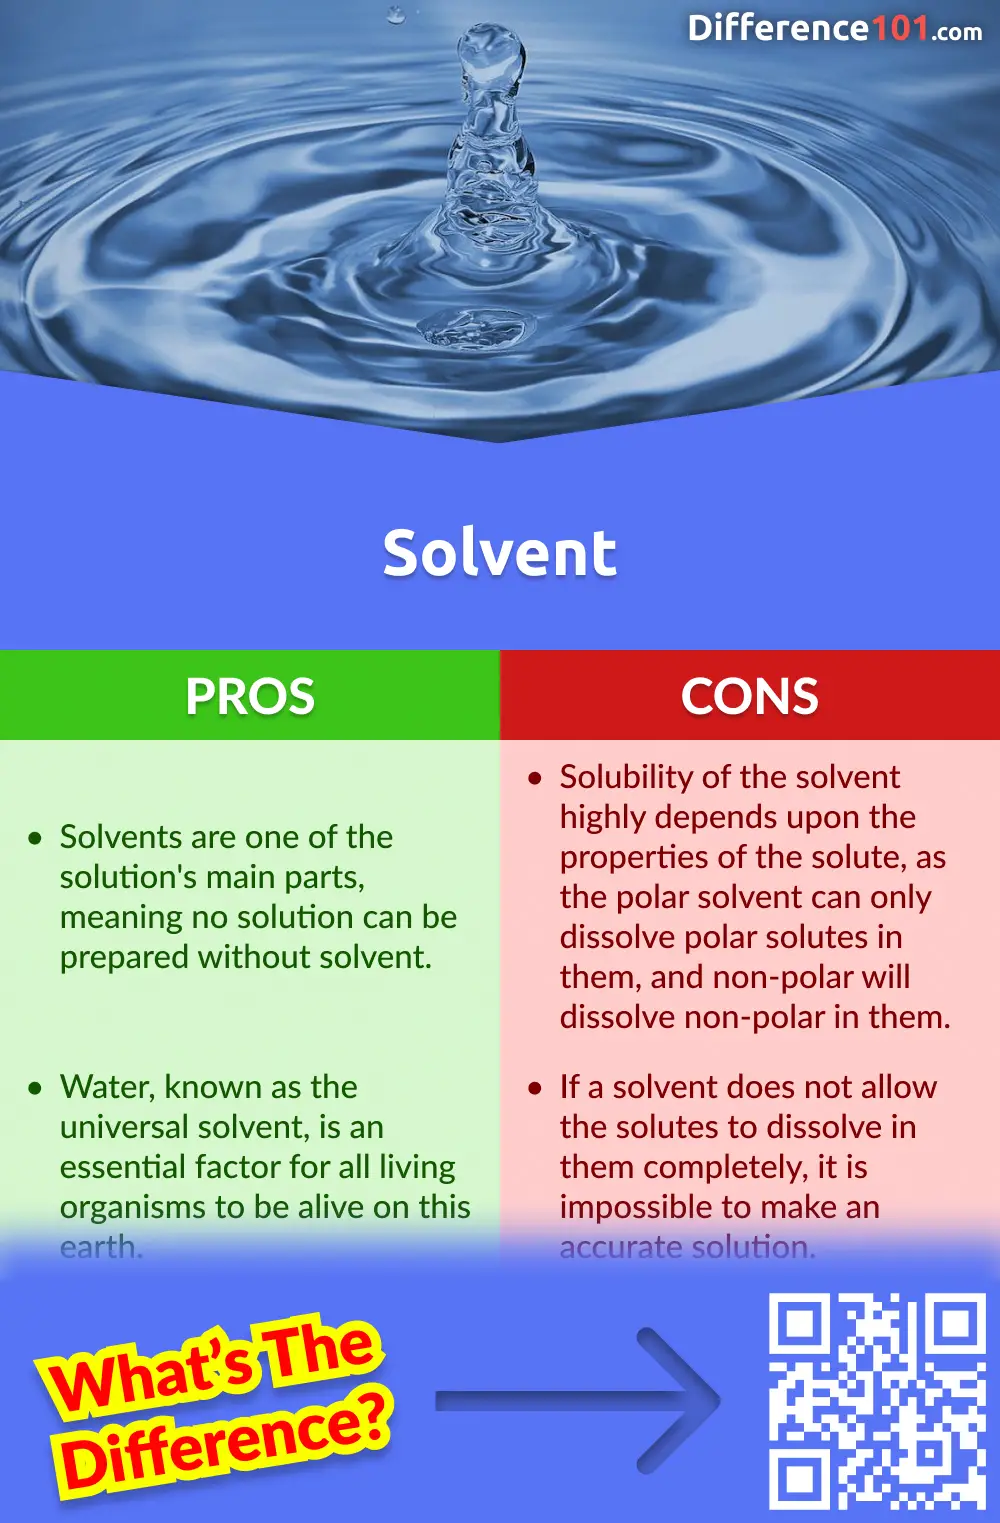 Solvent Pros and Cons
